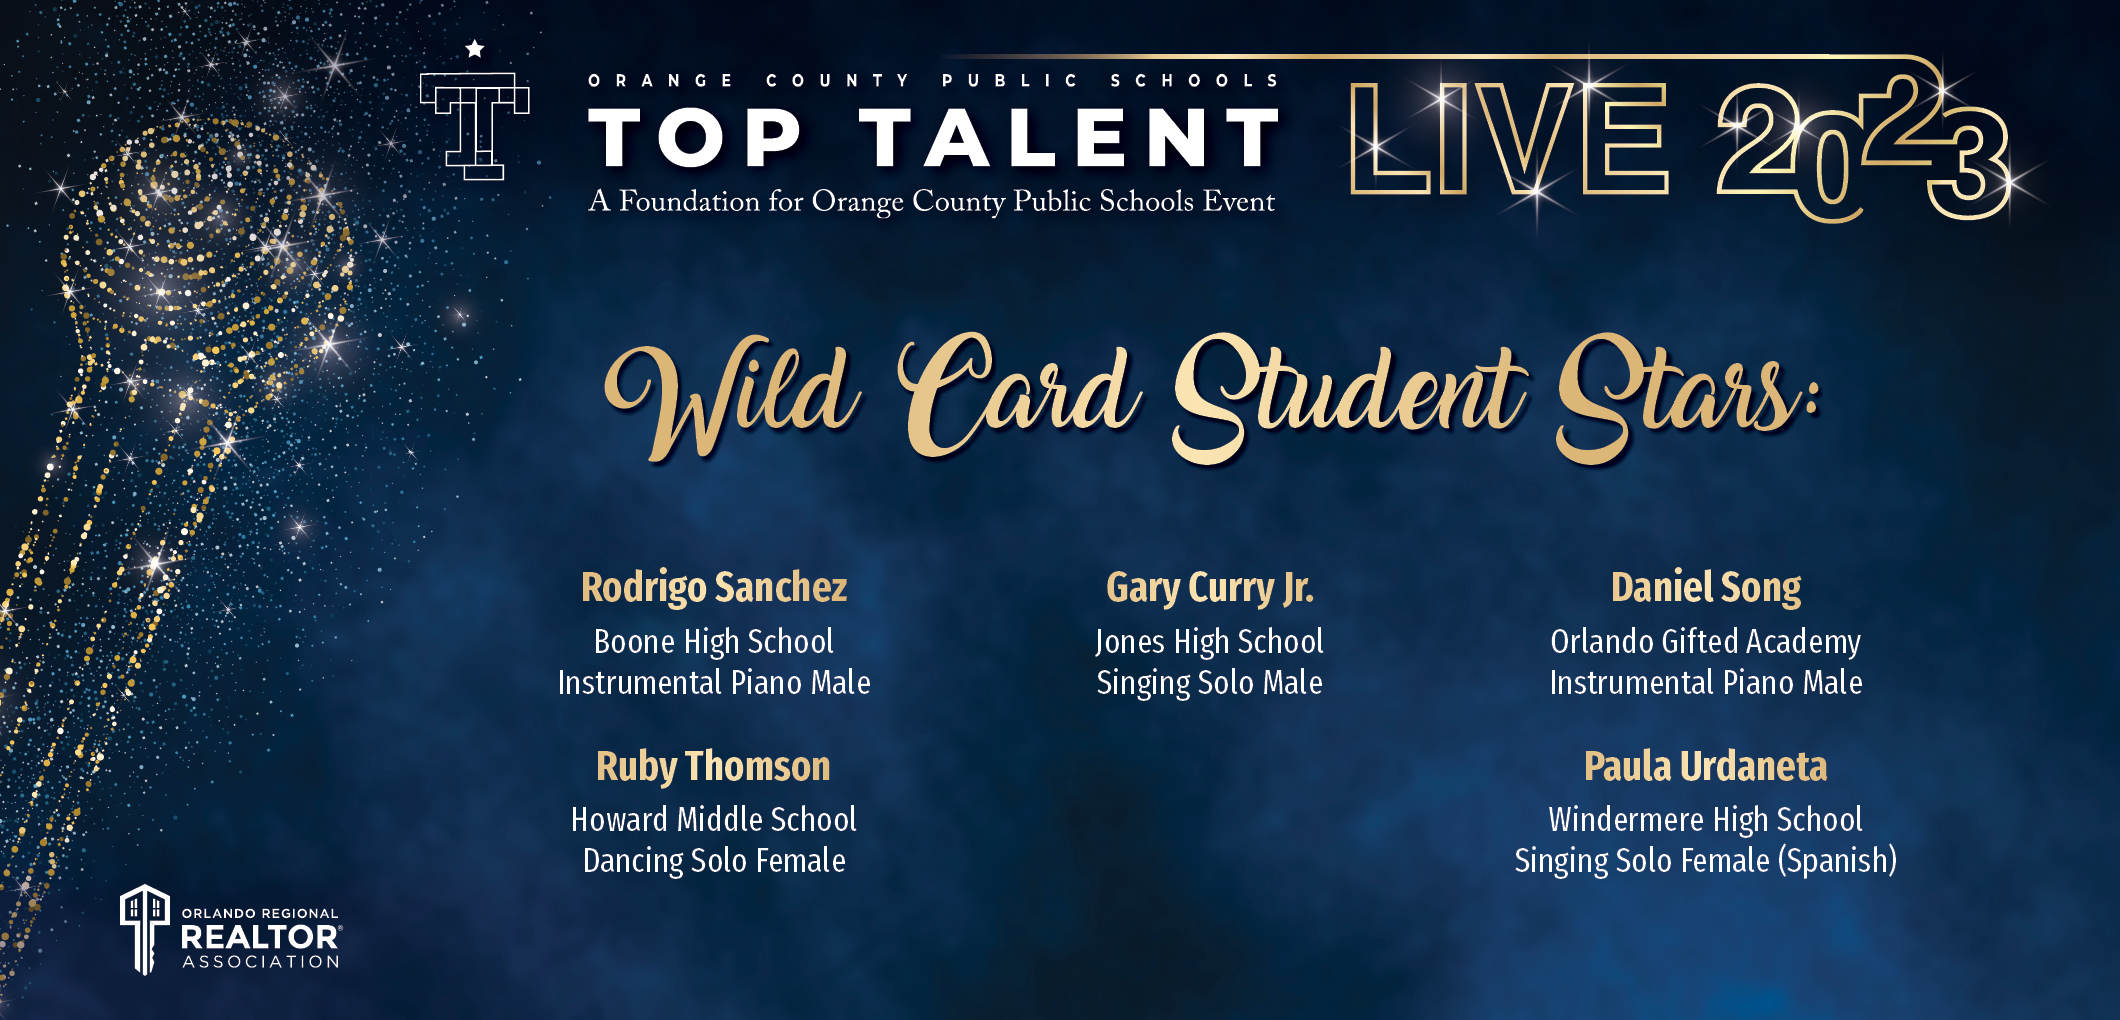 The Foundation for OCPS Top Talent LIVE 2023 Wild Card